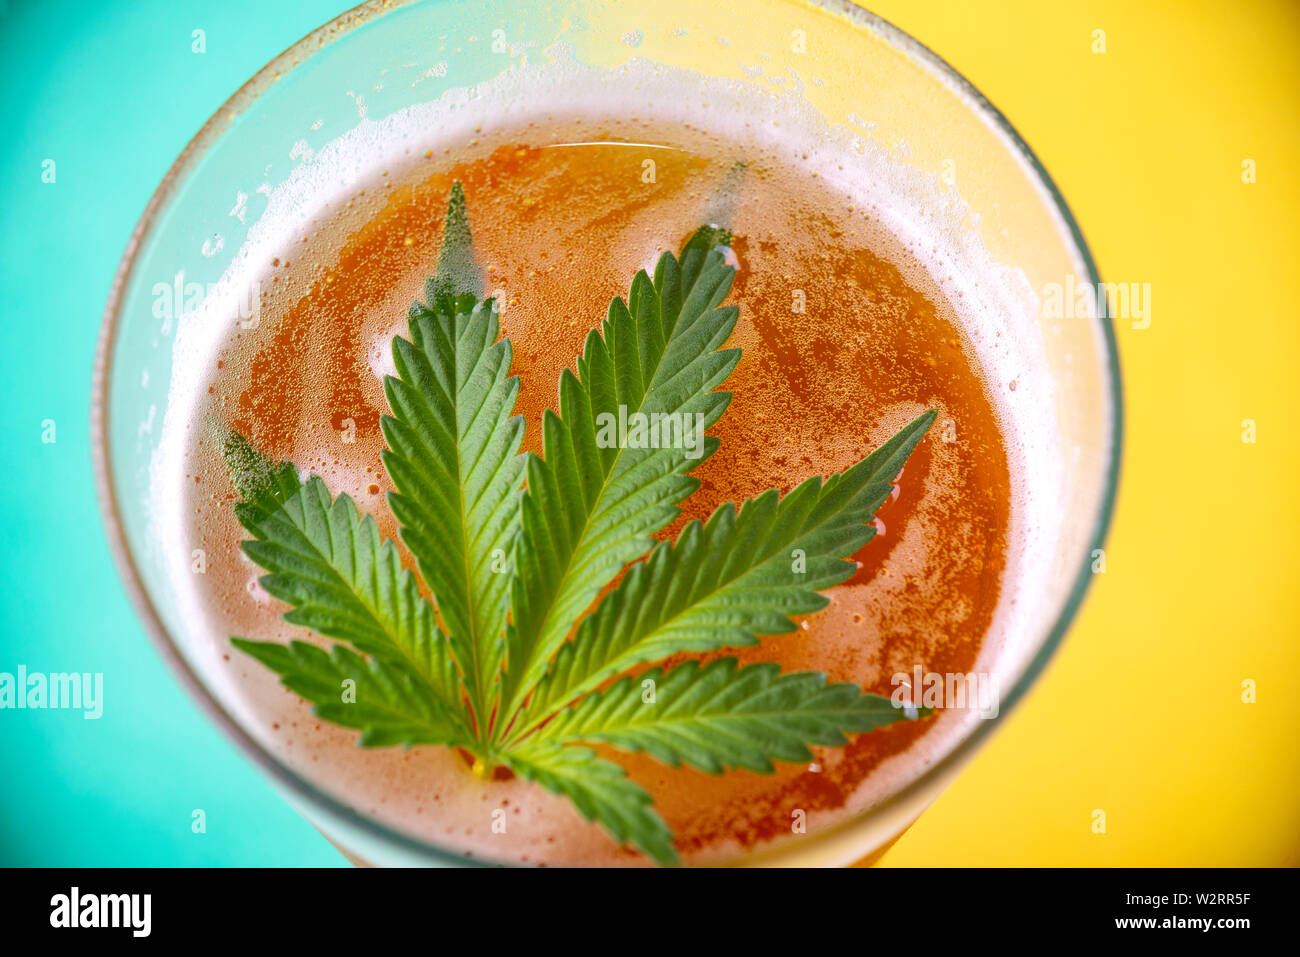 Detail of cold glass of beer with cannabis leaf, marijuana infused beverage concept Stock Photo